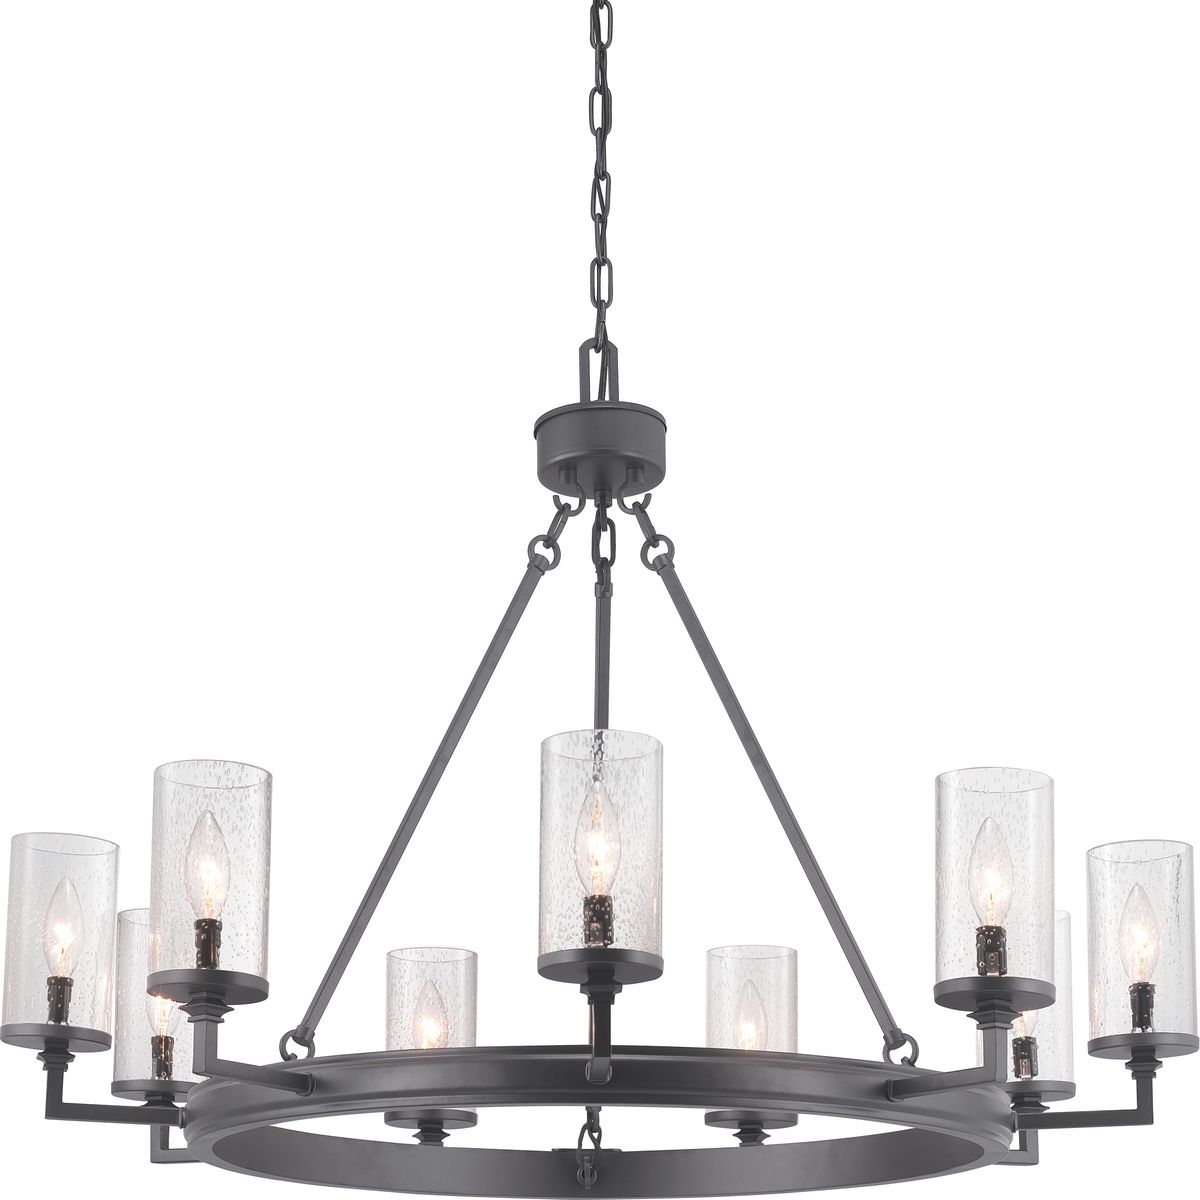 A display of substantial style in a nine-light chandelier, Gresham Collection�s frame was inspired by the elegance of traditional iron structures. Specific attention to forging details creates a distinctive collection for Transitional and Farmhouse interior spaces. Seeded glass shades and a Graphite finish pair together to complete the look.